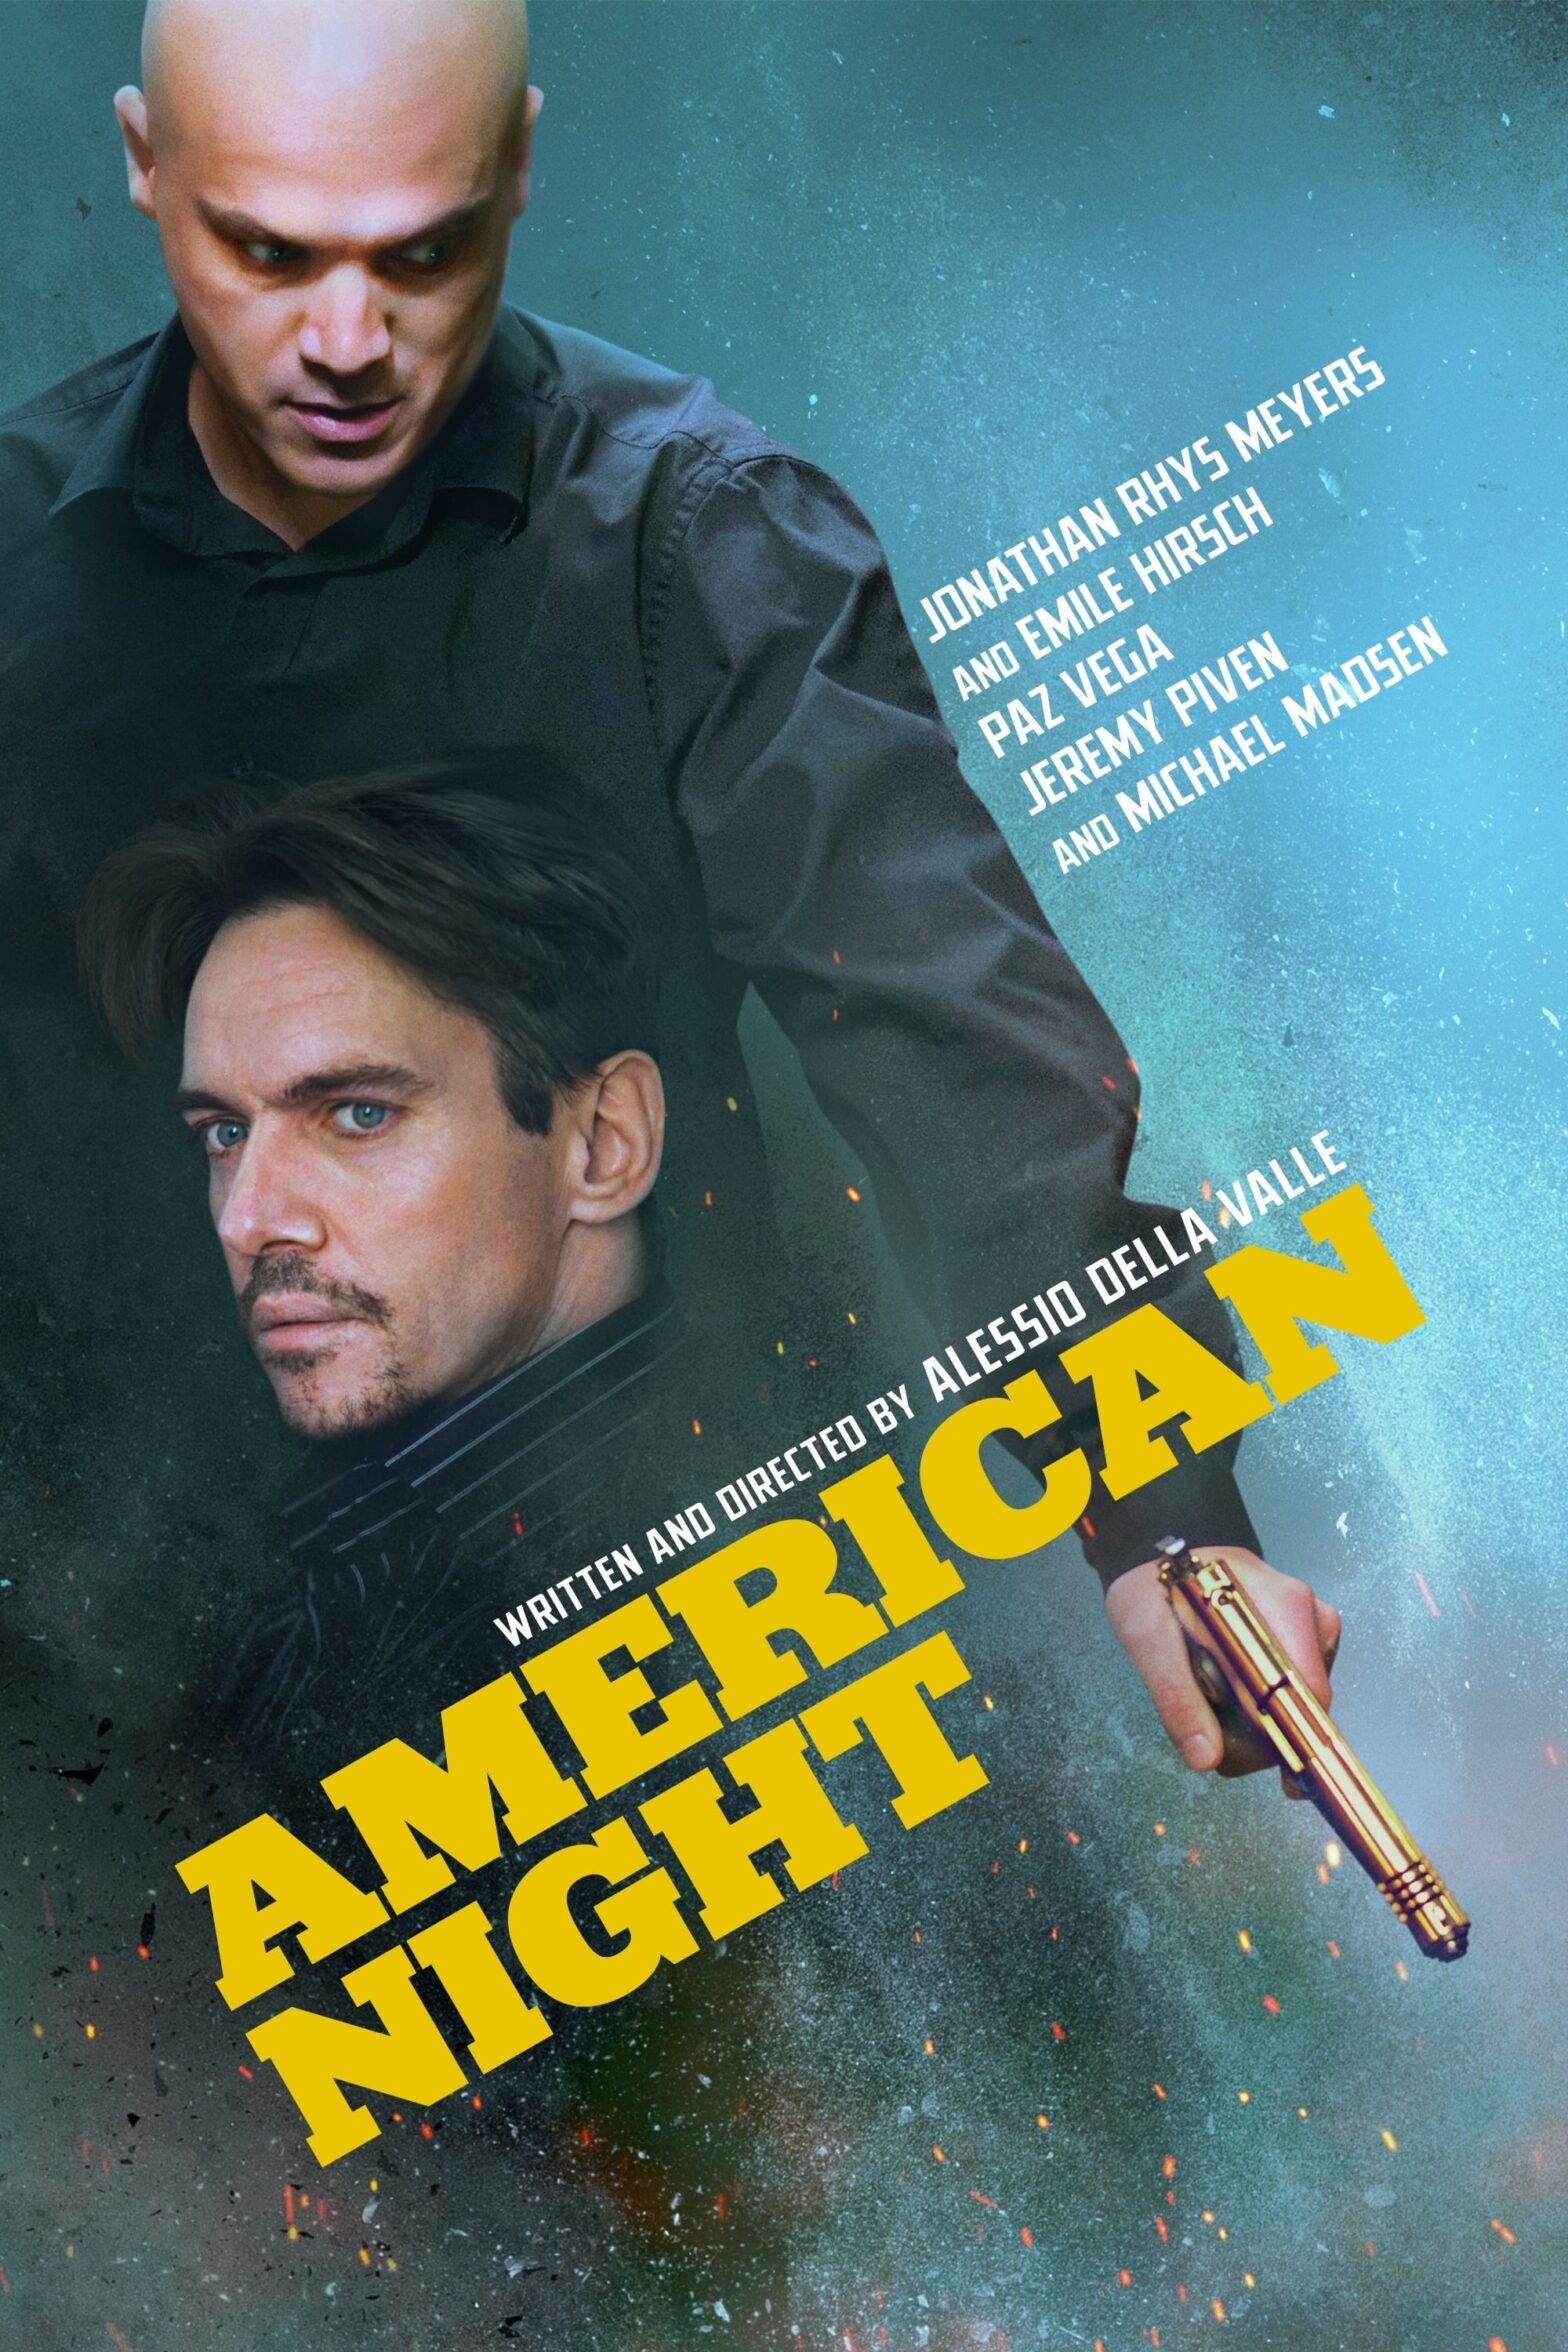 Poster for the movie "American Night"